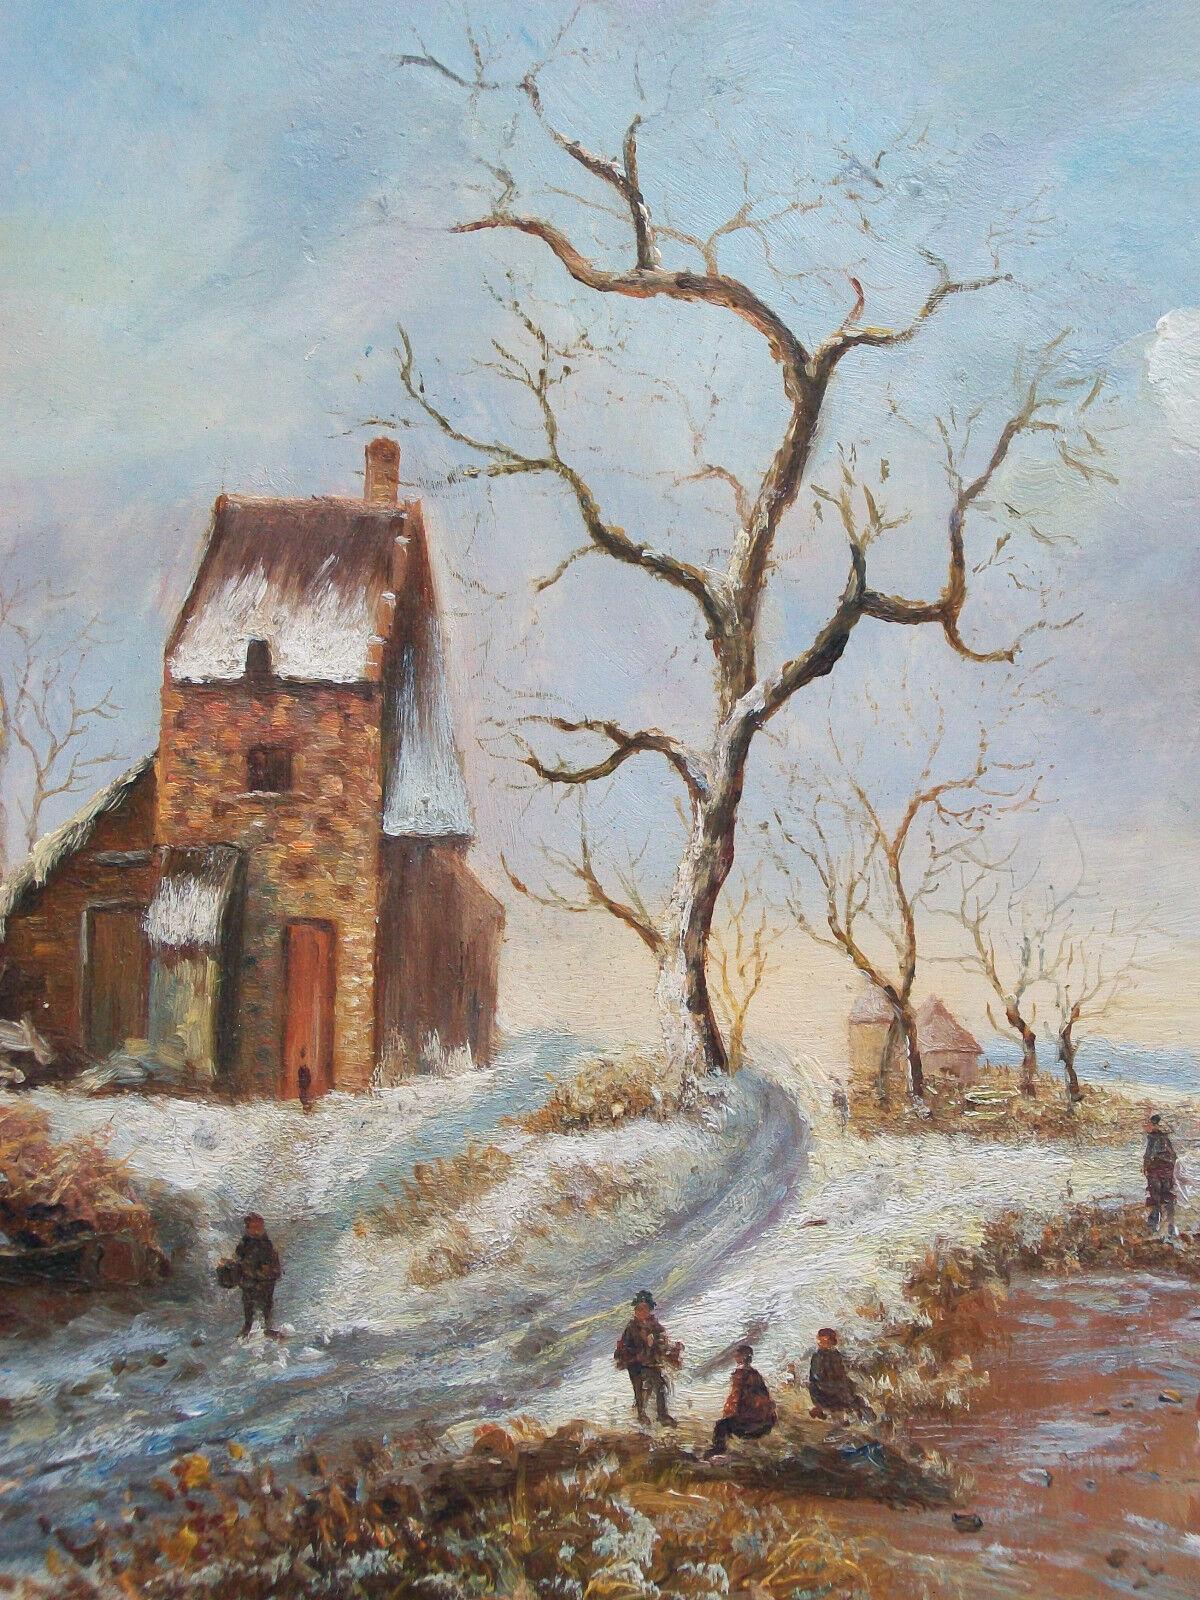 Vintage Continental winter landscape painting on panel - Dutch style - unsigned - unframed - gallery/inventory label verso - mid 20th century.

Excellent état vintage - pas de perte - pas de dommage - pas de restauration - non encadré - vernis